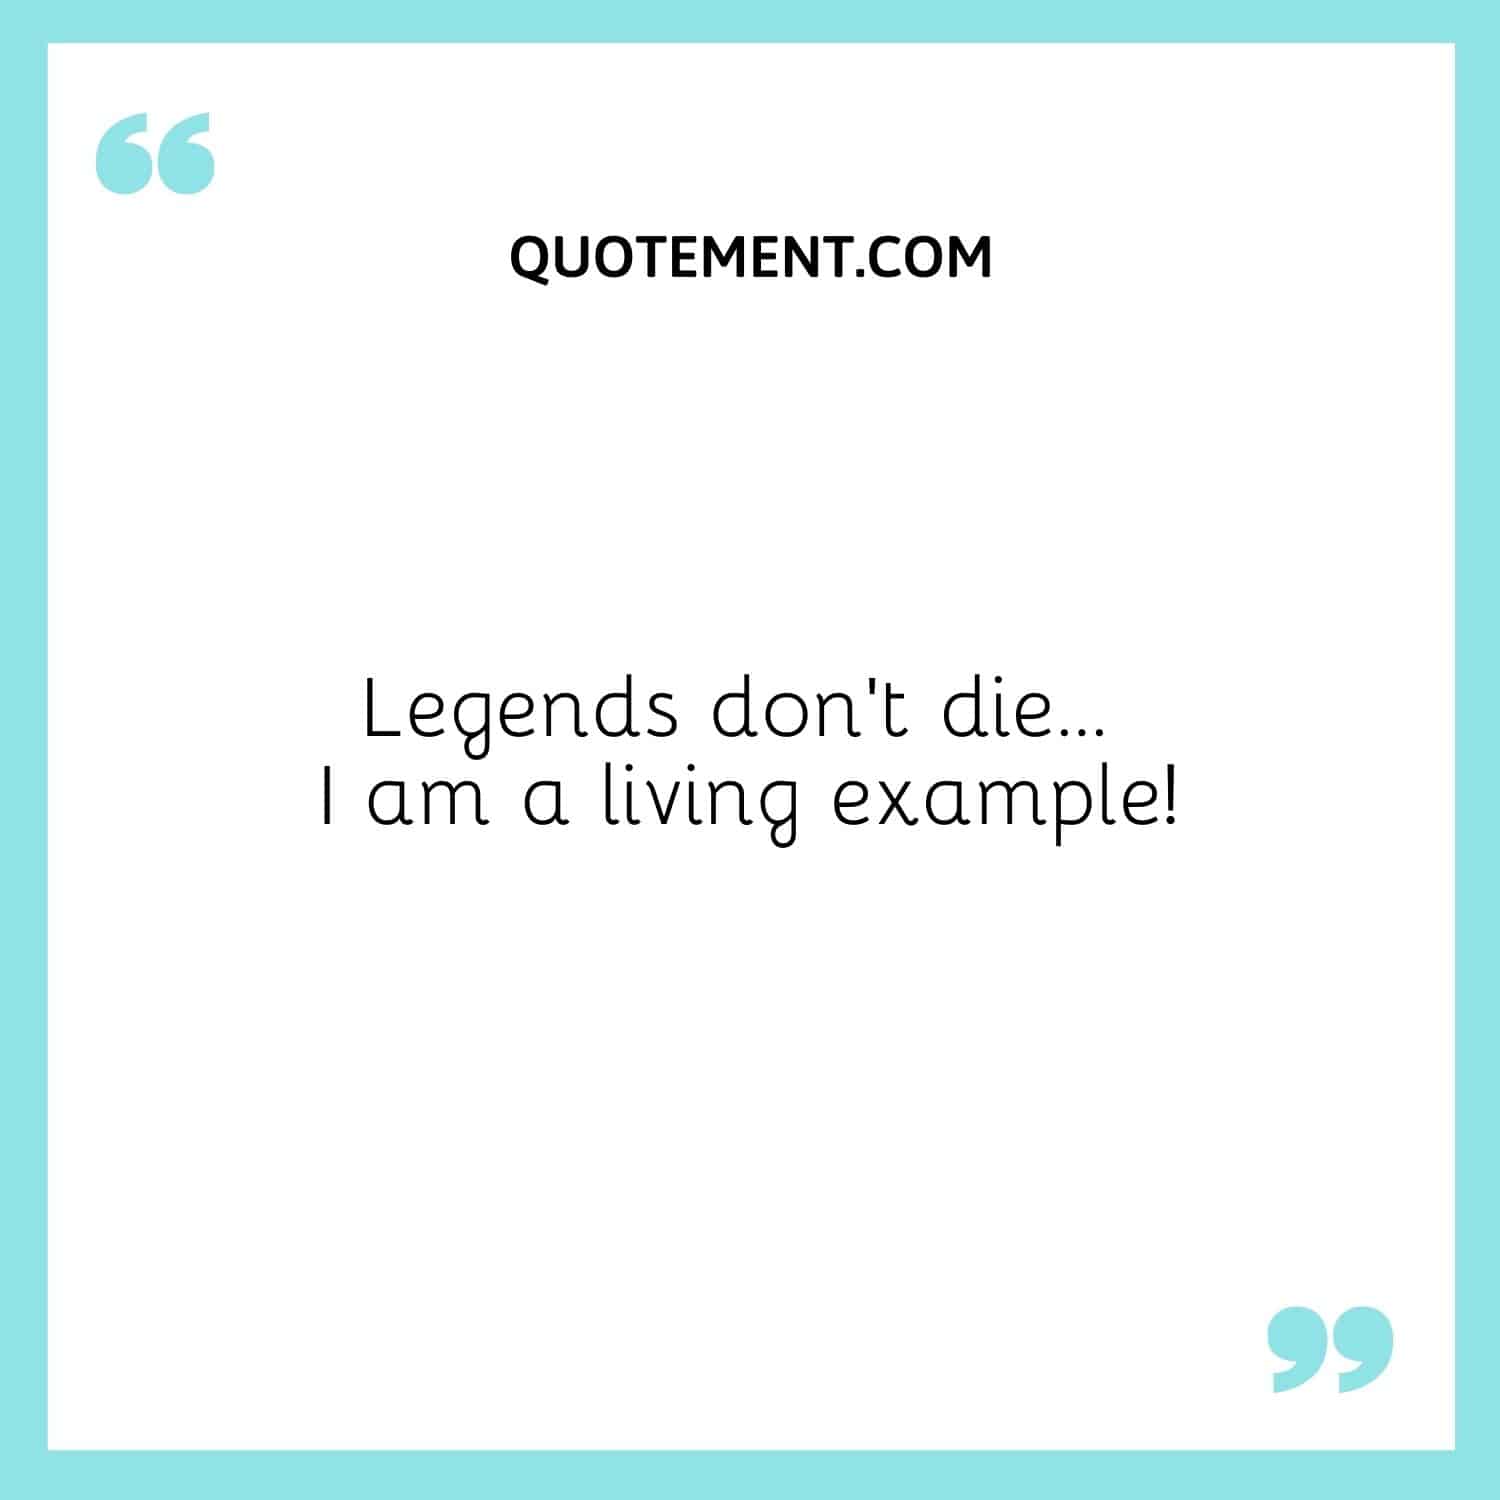 Legends don’t die… I am a living example!